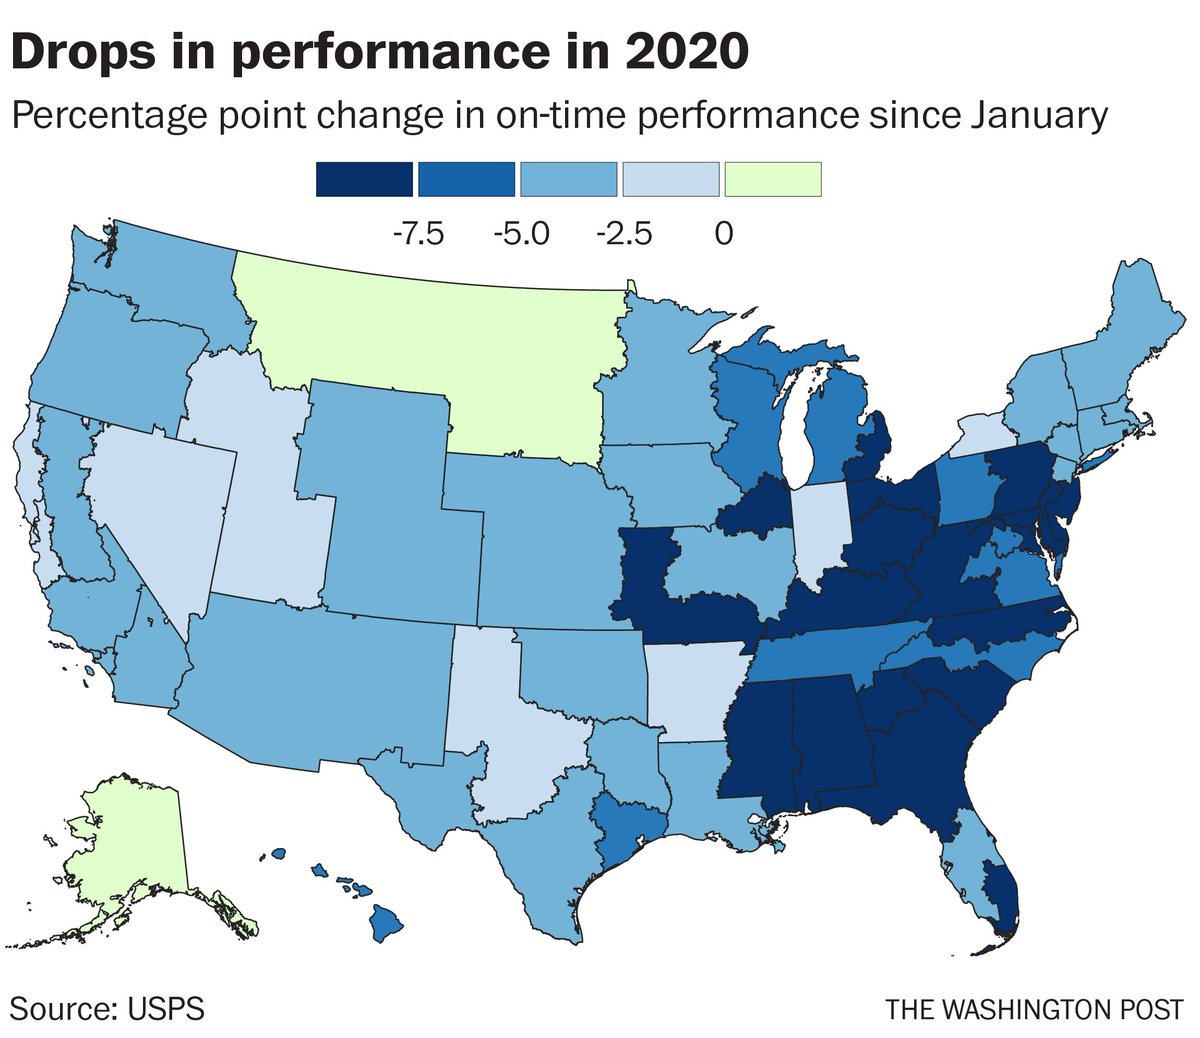 Here's a map showing the drop in on-time service since Jan. Note that battleground areas in PA, MI, WI, FL, OH and NC have seen some of the steepest declines.  https://www.washingtonpost.com/business/2020/10/20/swing-states-election-usps/